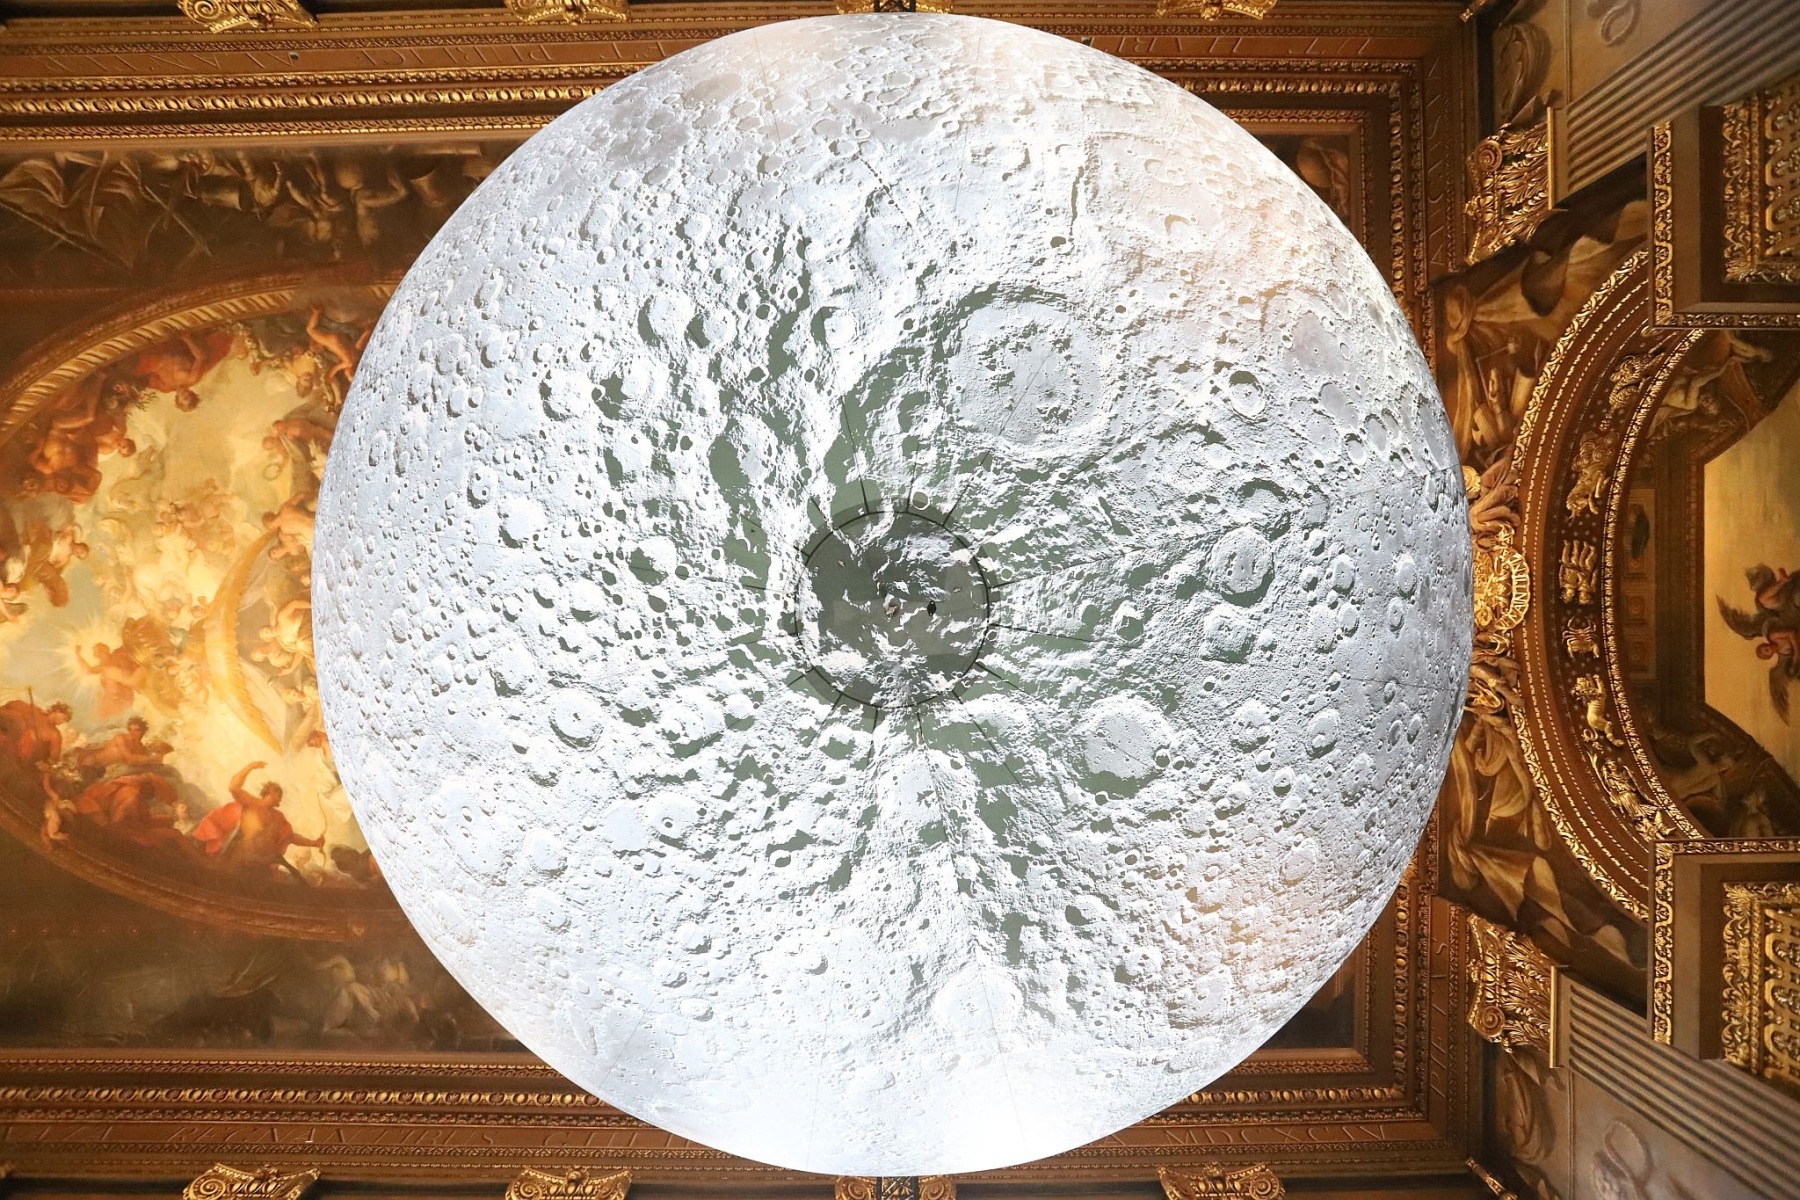 Museum of the Moon, by Luke Jerram, at the Old Royal Naval College in Greenwich, London